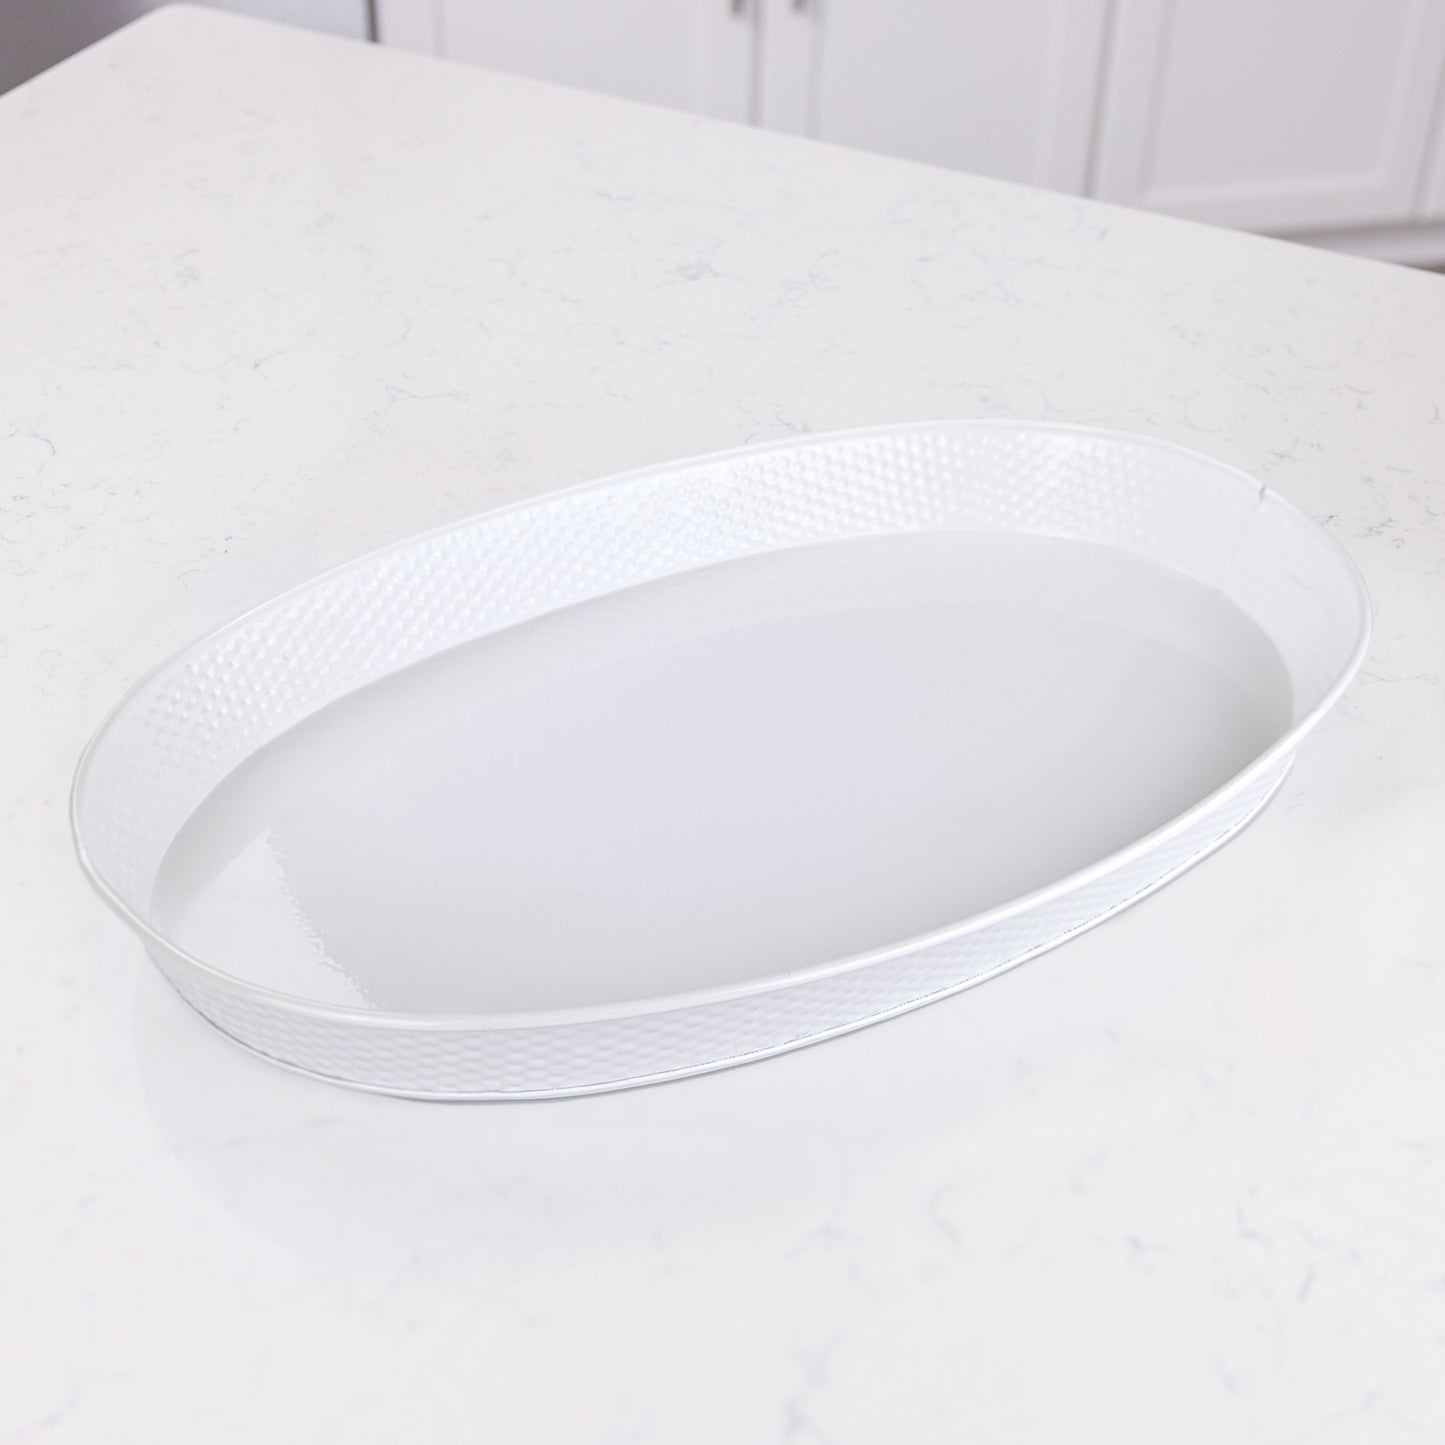 Serving Tray Hammered in White - Kingston